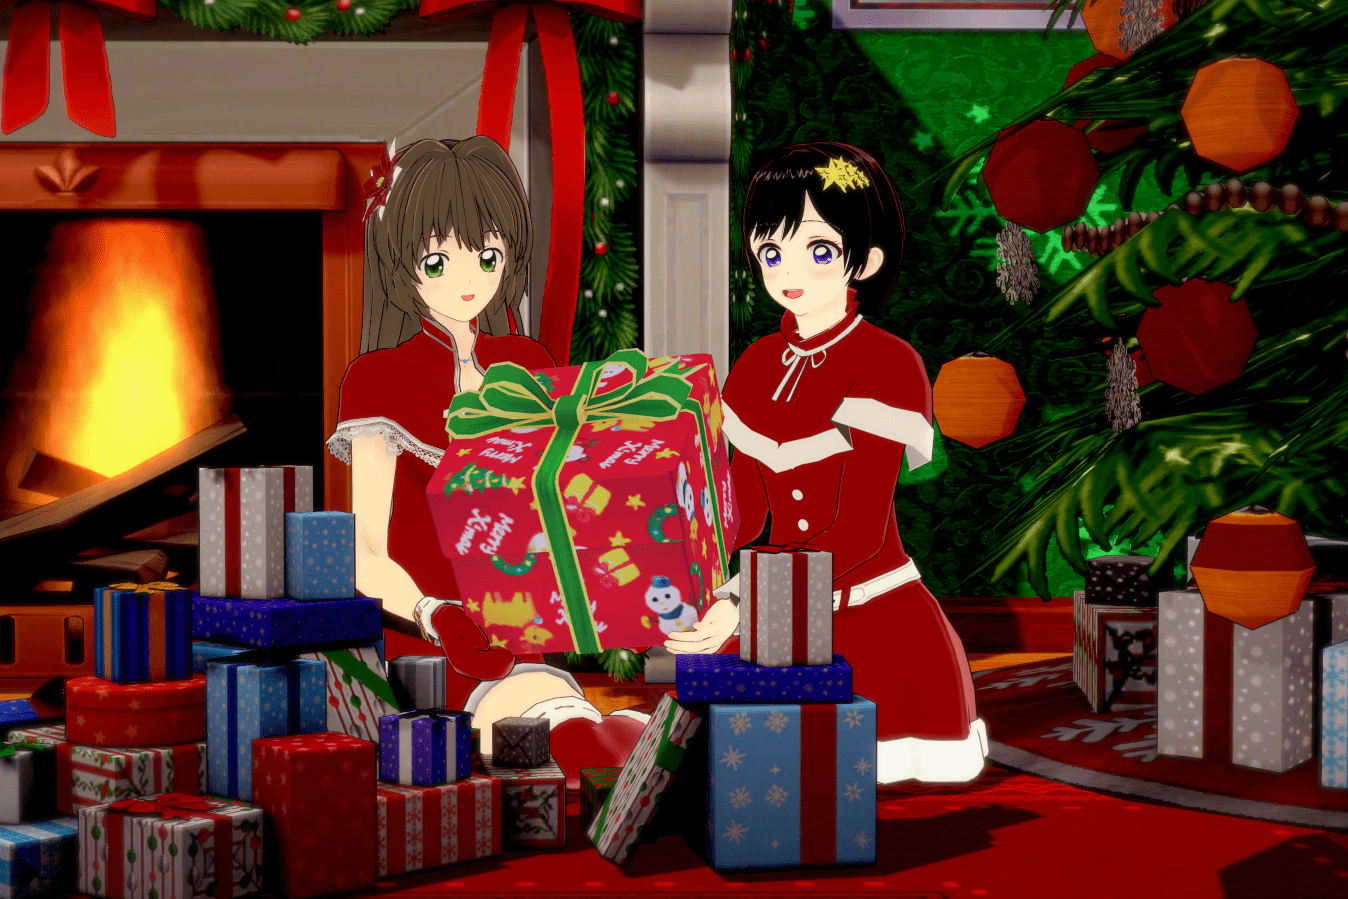 Nikki and Ami in Santa Claus outfits